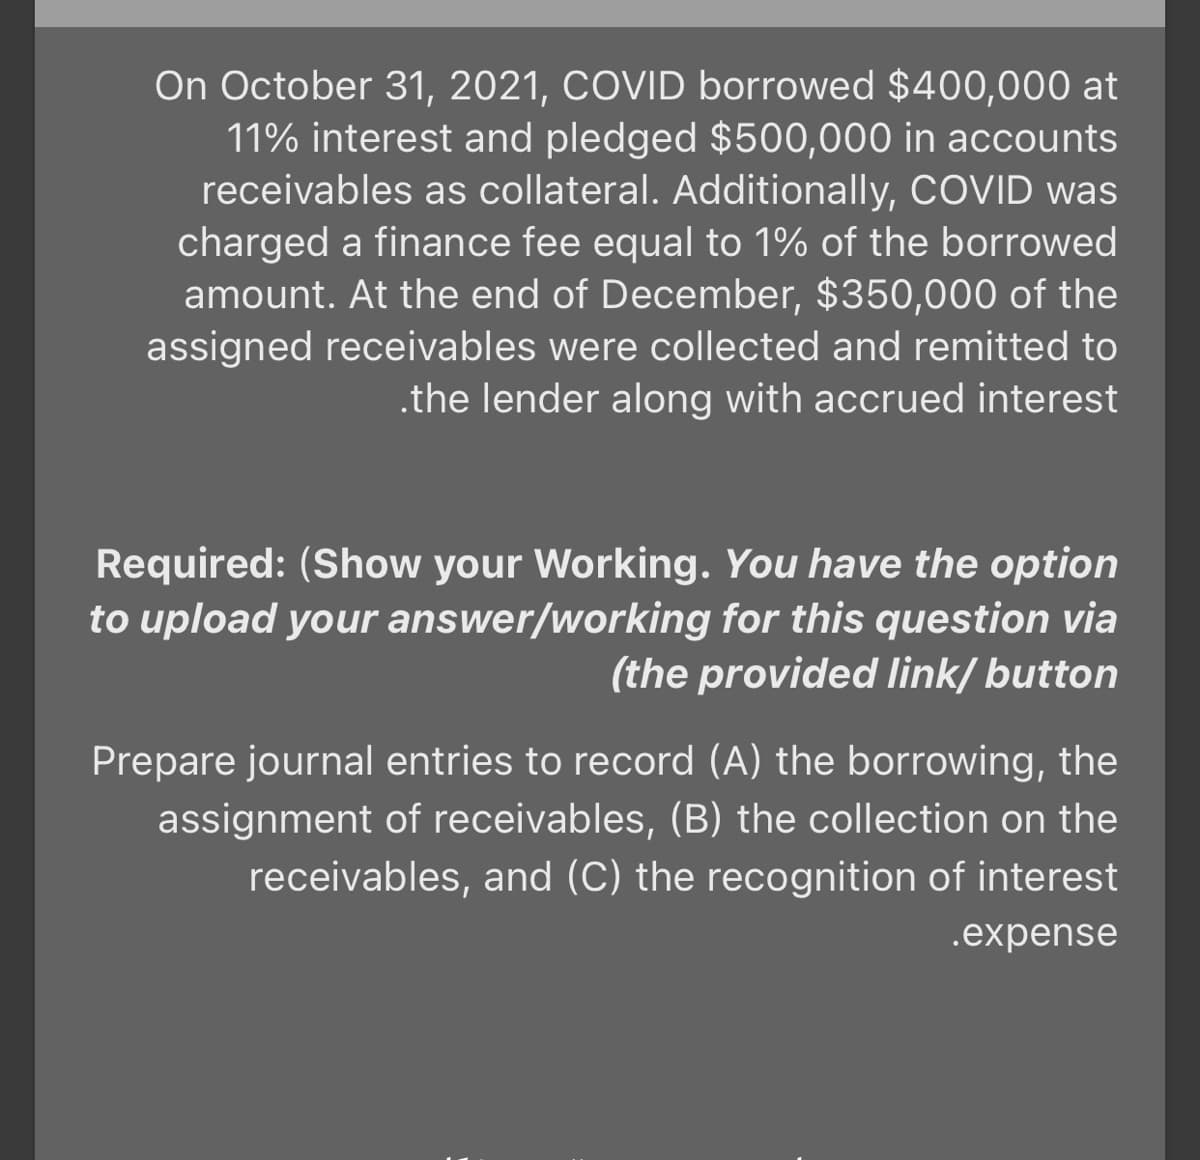 On October 31, 2021, COVID borrowed $400,000 at
11% interest and pledged $500,000 in accounts
receivables as collateral. Additionally, COVID was
charged a finance fee equal to 1% of the borrowed
amount. At the end of December, $350,000 of the
assigned receivables were collected and remitted to
.the lender along with accrued interest
Required: (Show your Working. You have the option
to upload your answer/working for this question via
(the provided Ilink/ button
Prepare journal entries to record (A) the borrowing, the
assignment of receivables, (B) the collection on the
receivables, and (C) the recognition of interest
.expense
